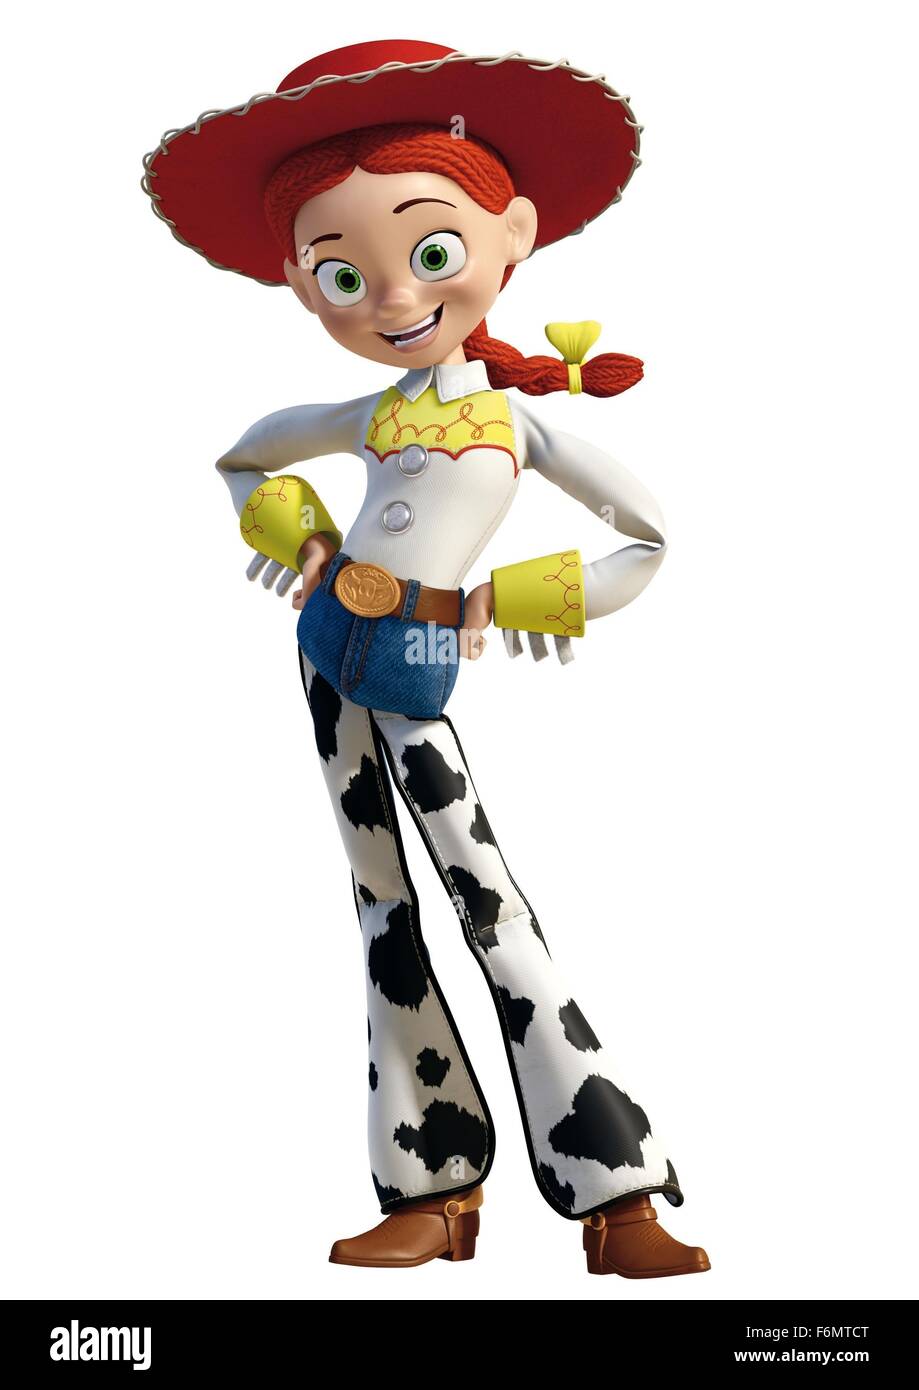 Toy story 3 Cut Out Stock Images & Pictures - Alamy